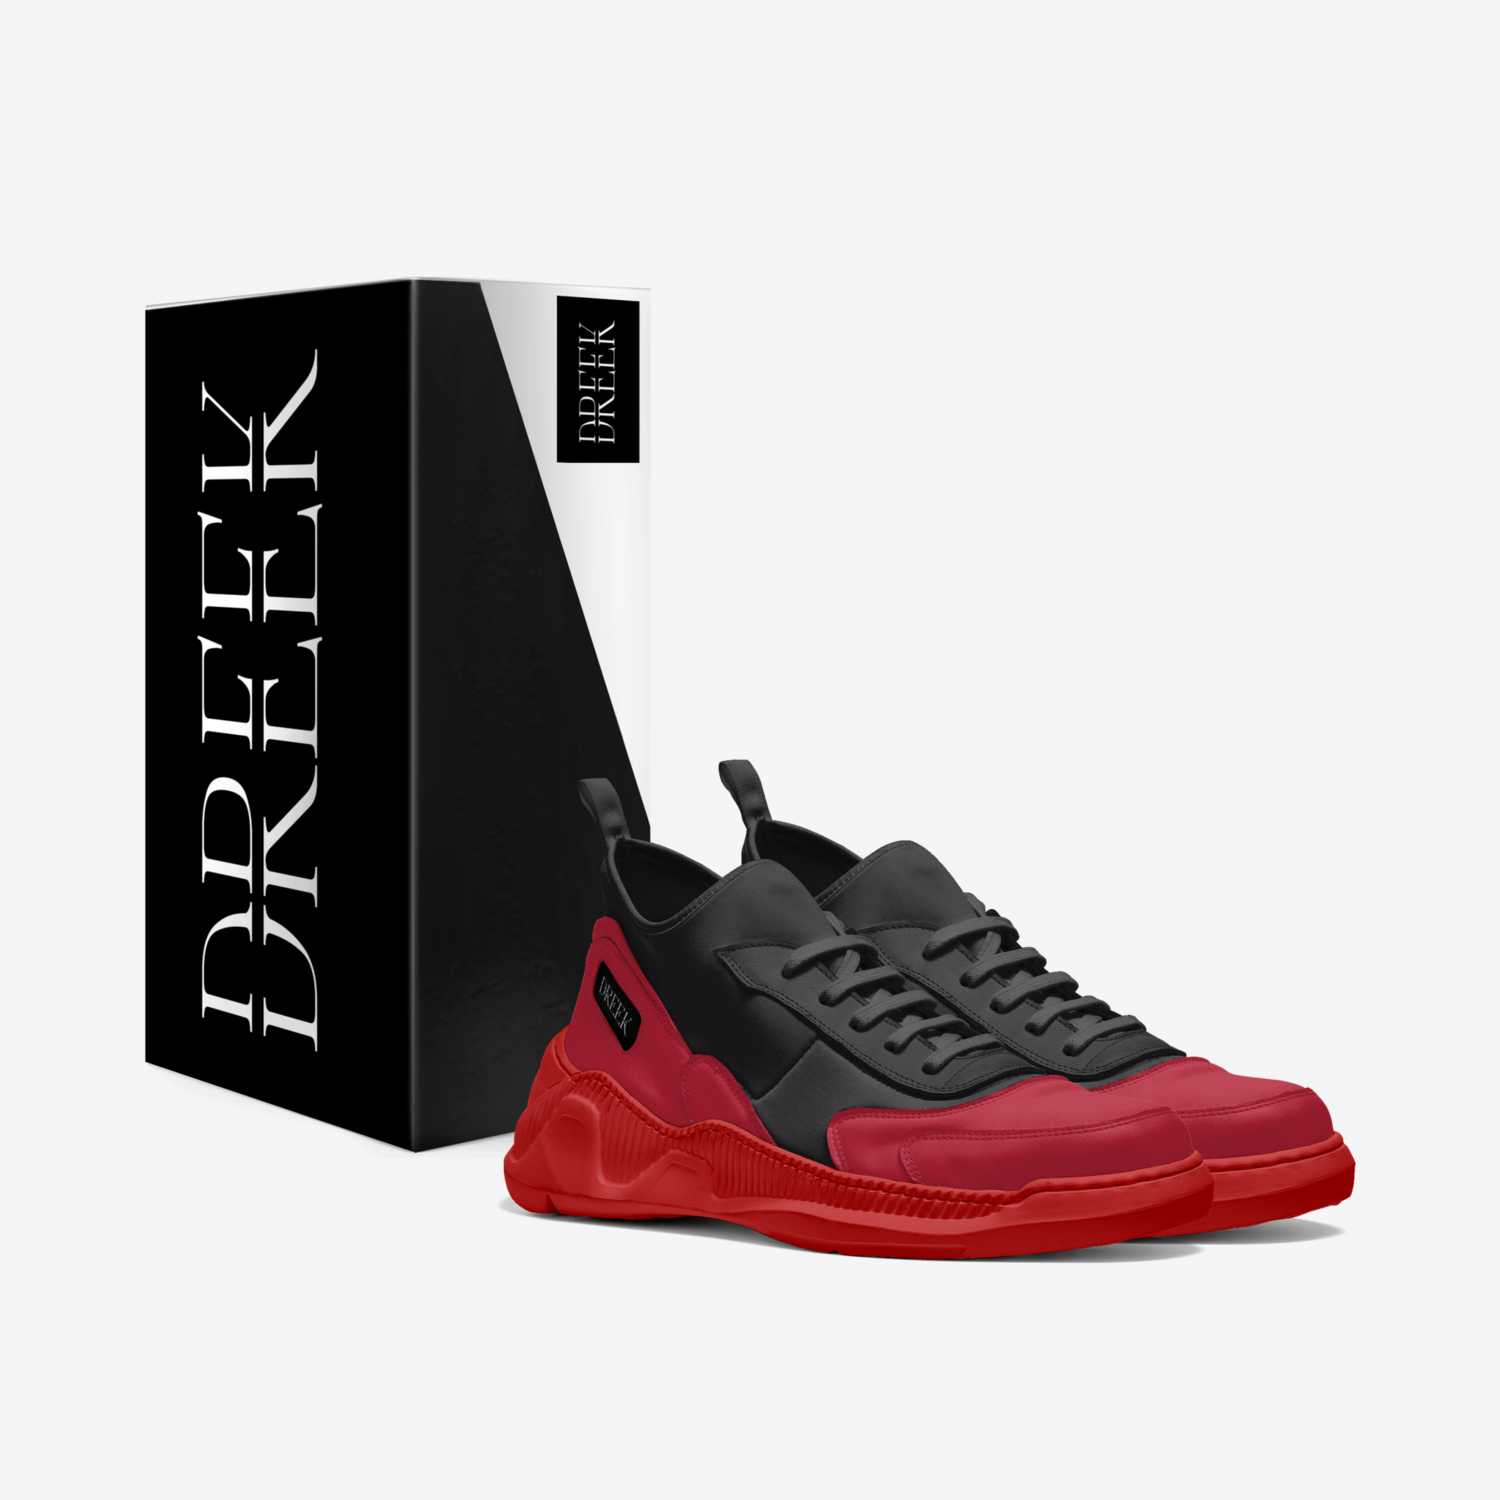 Dreek custom made in Italy shoes by Fredrick Smith | Box view